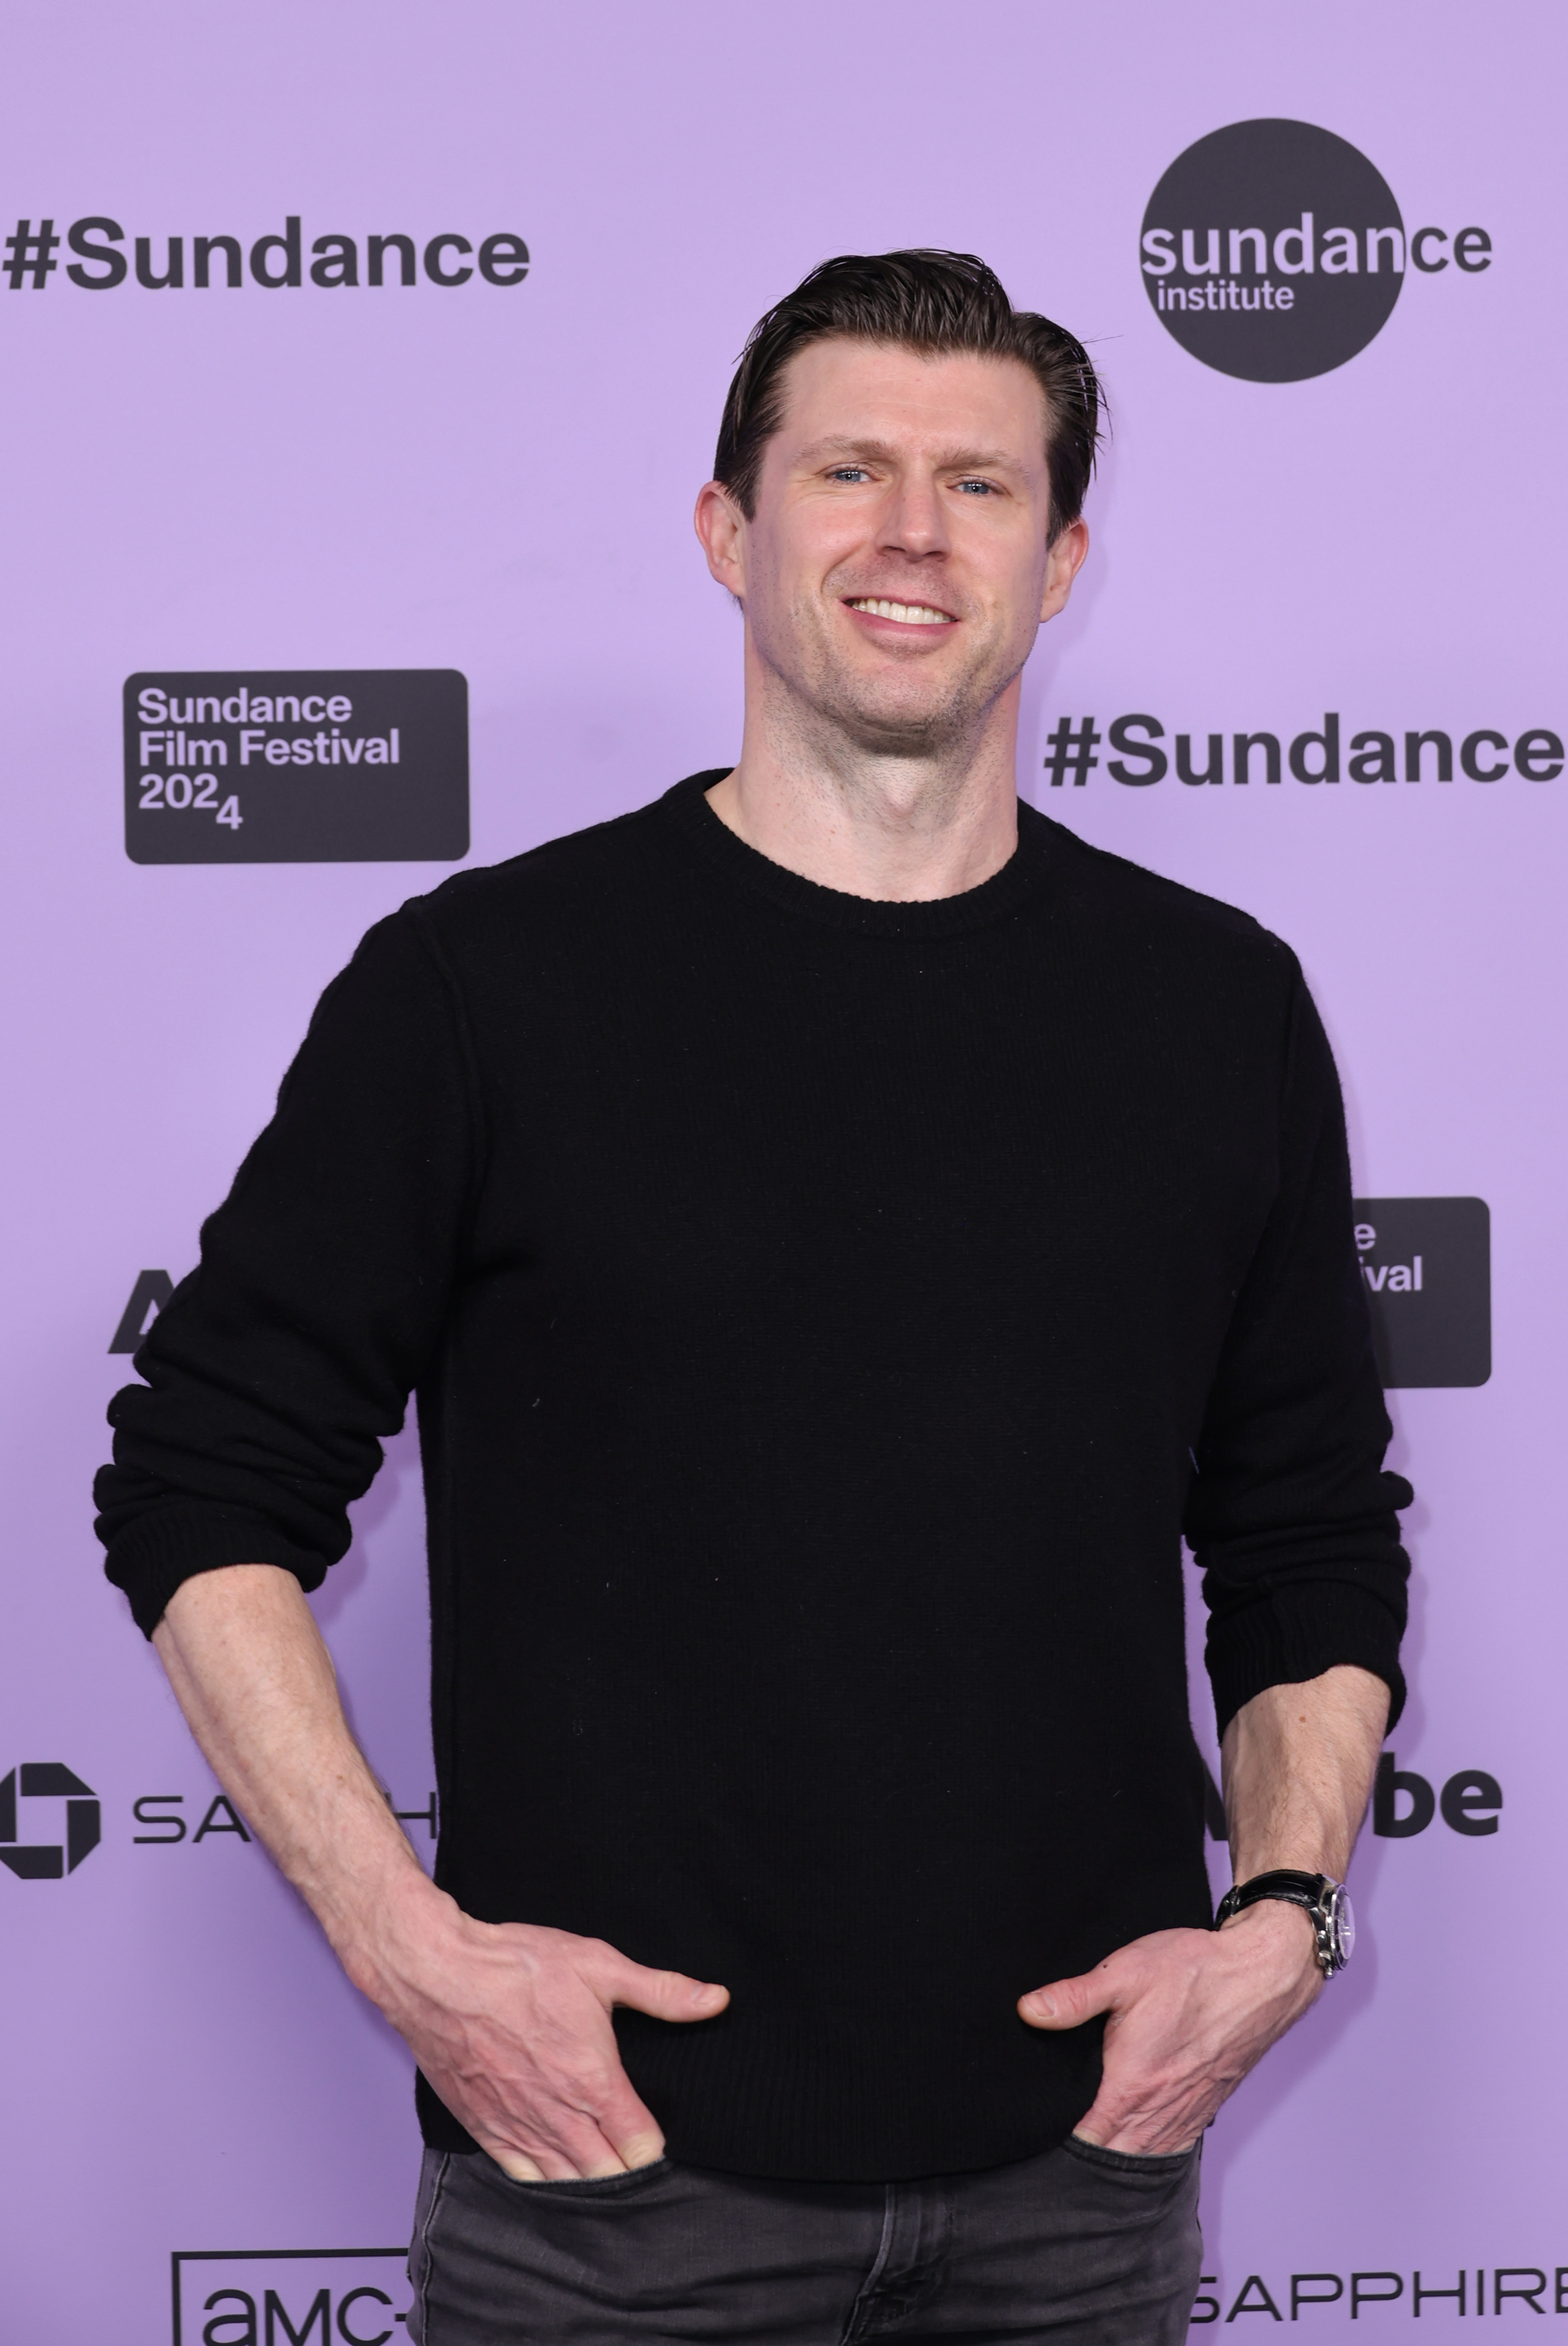 Matthew Reeve at the Super/Man: The Christopher Reeve Story Premiere during the 2024 Sundance Film Festival at The Ray Theatre on January 21, 2024, in Park City, Utah